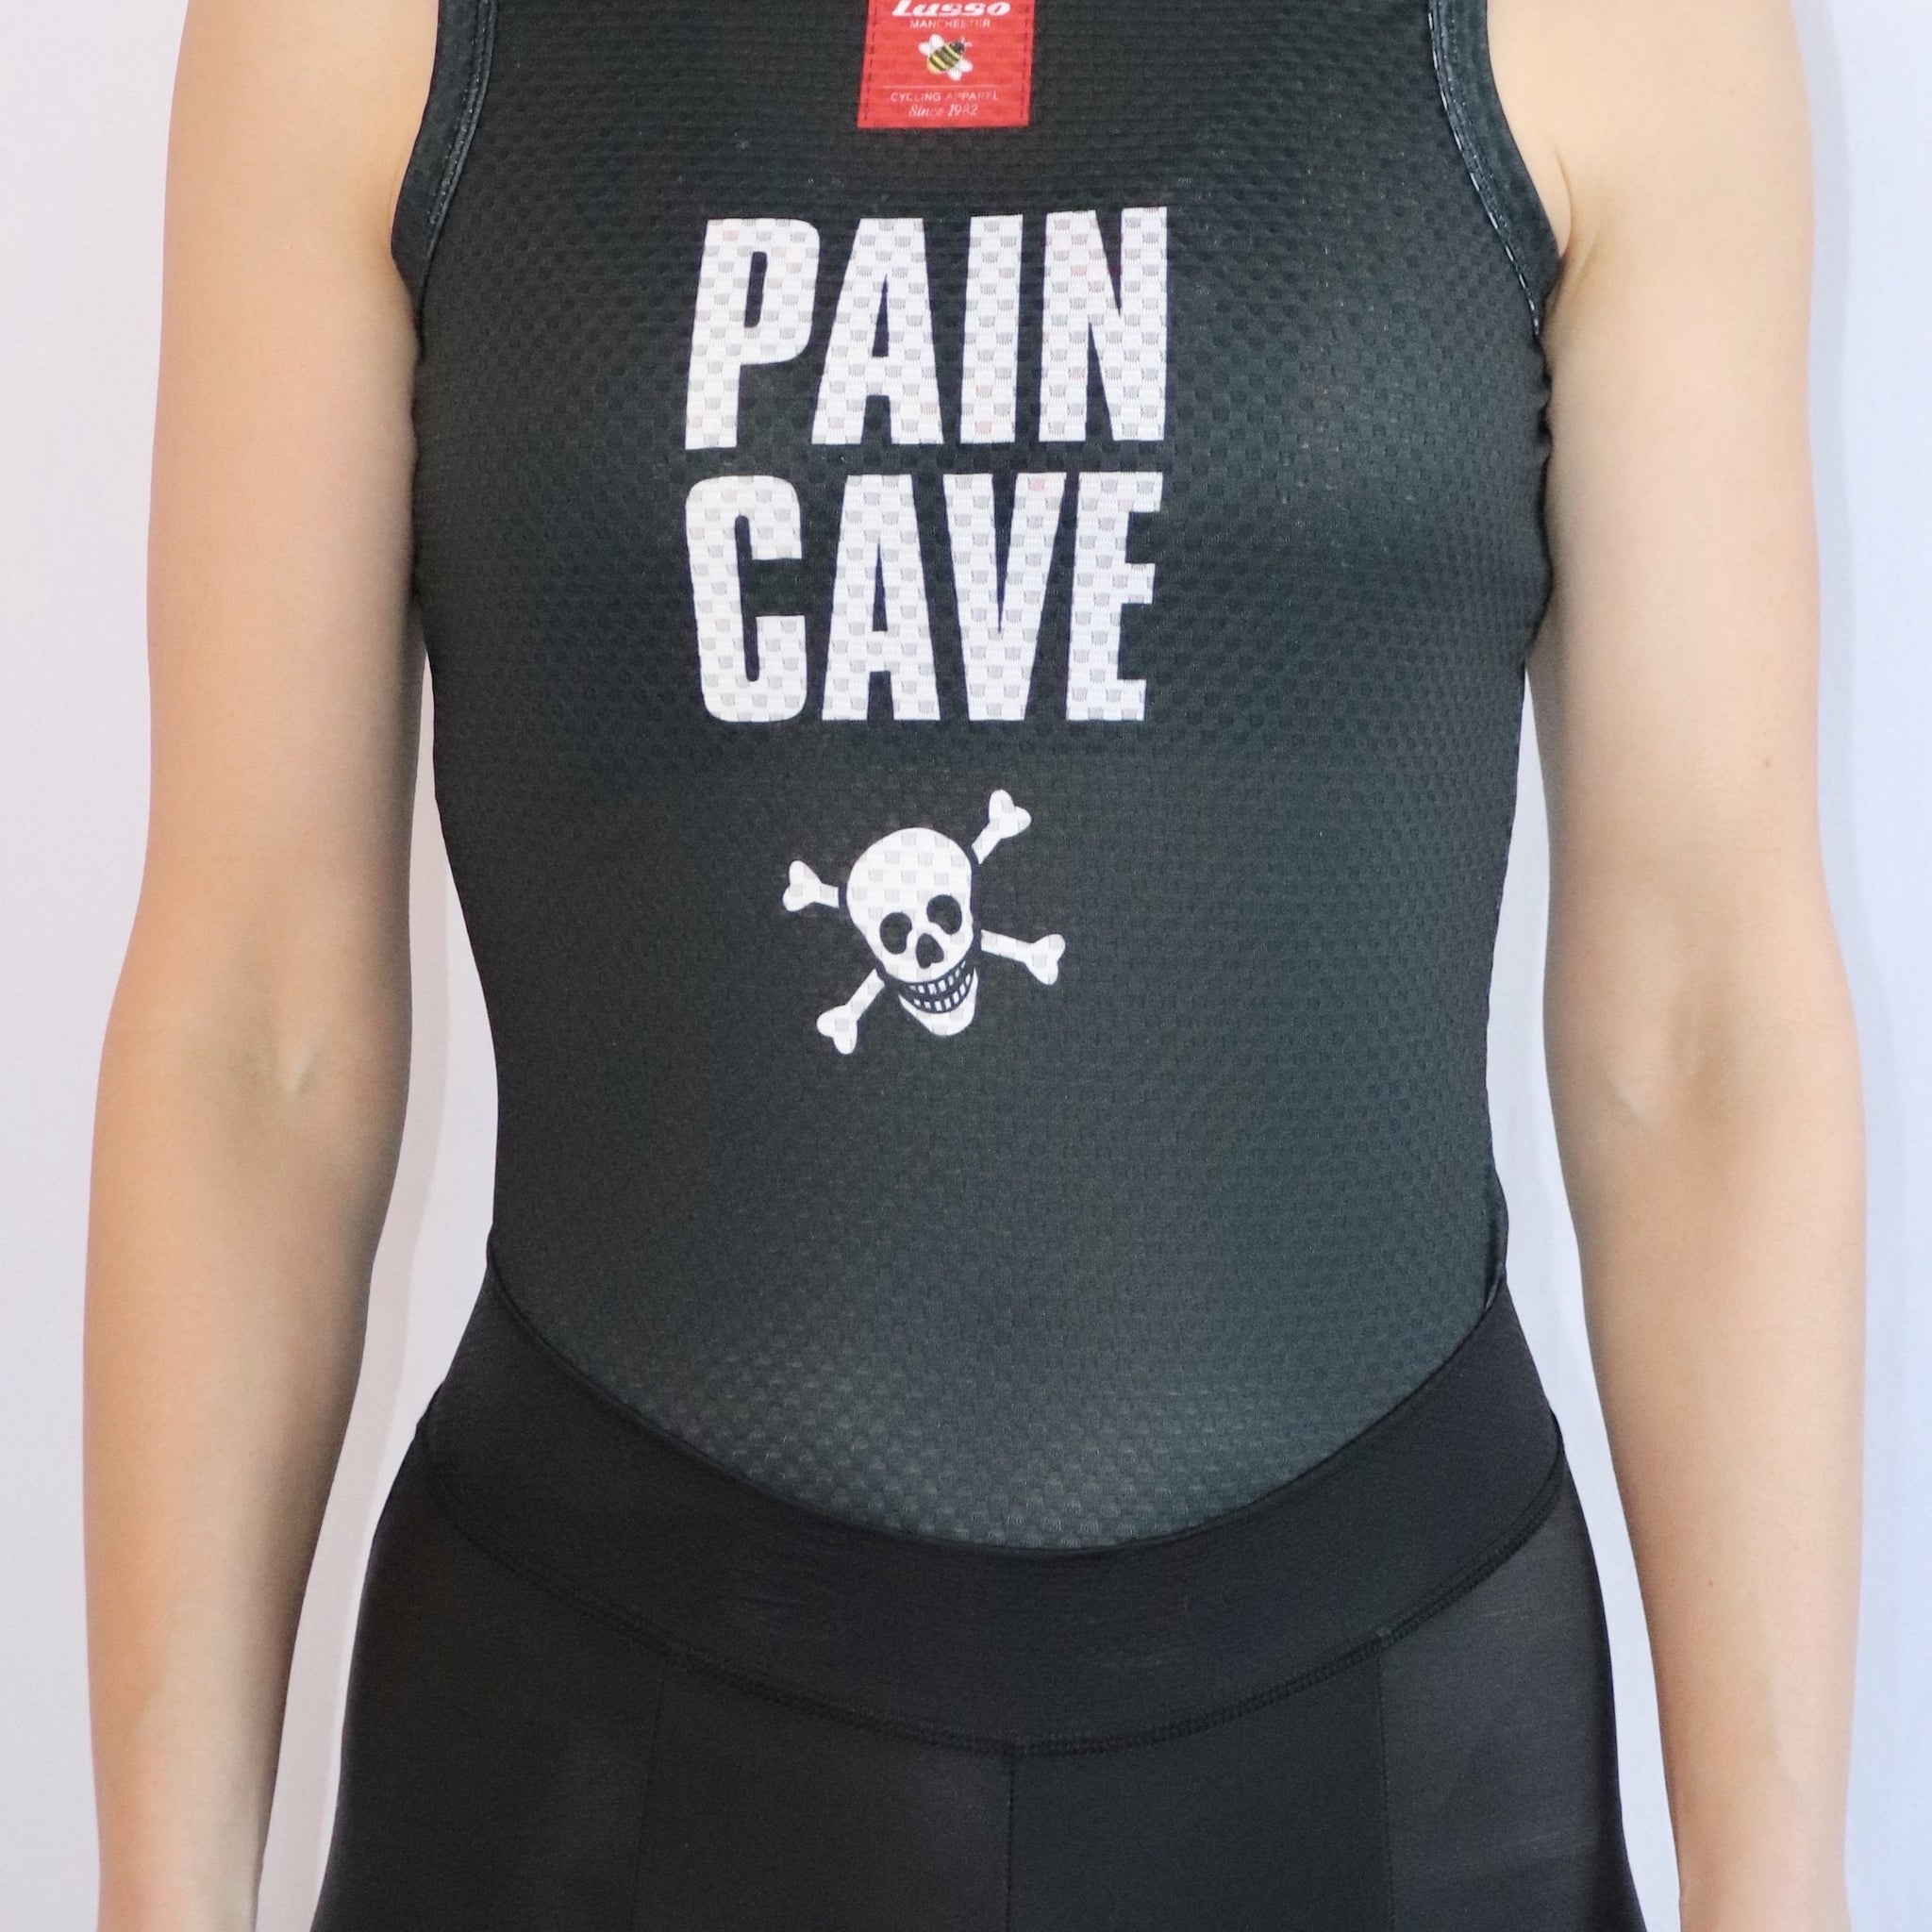 Pain Cave Eco Summer Base layer - Lusso Cycle Wear